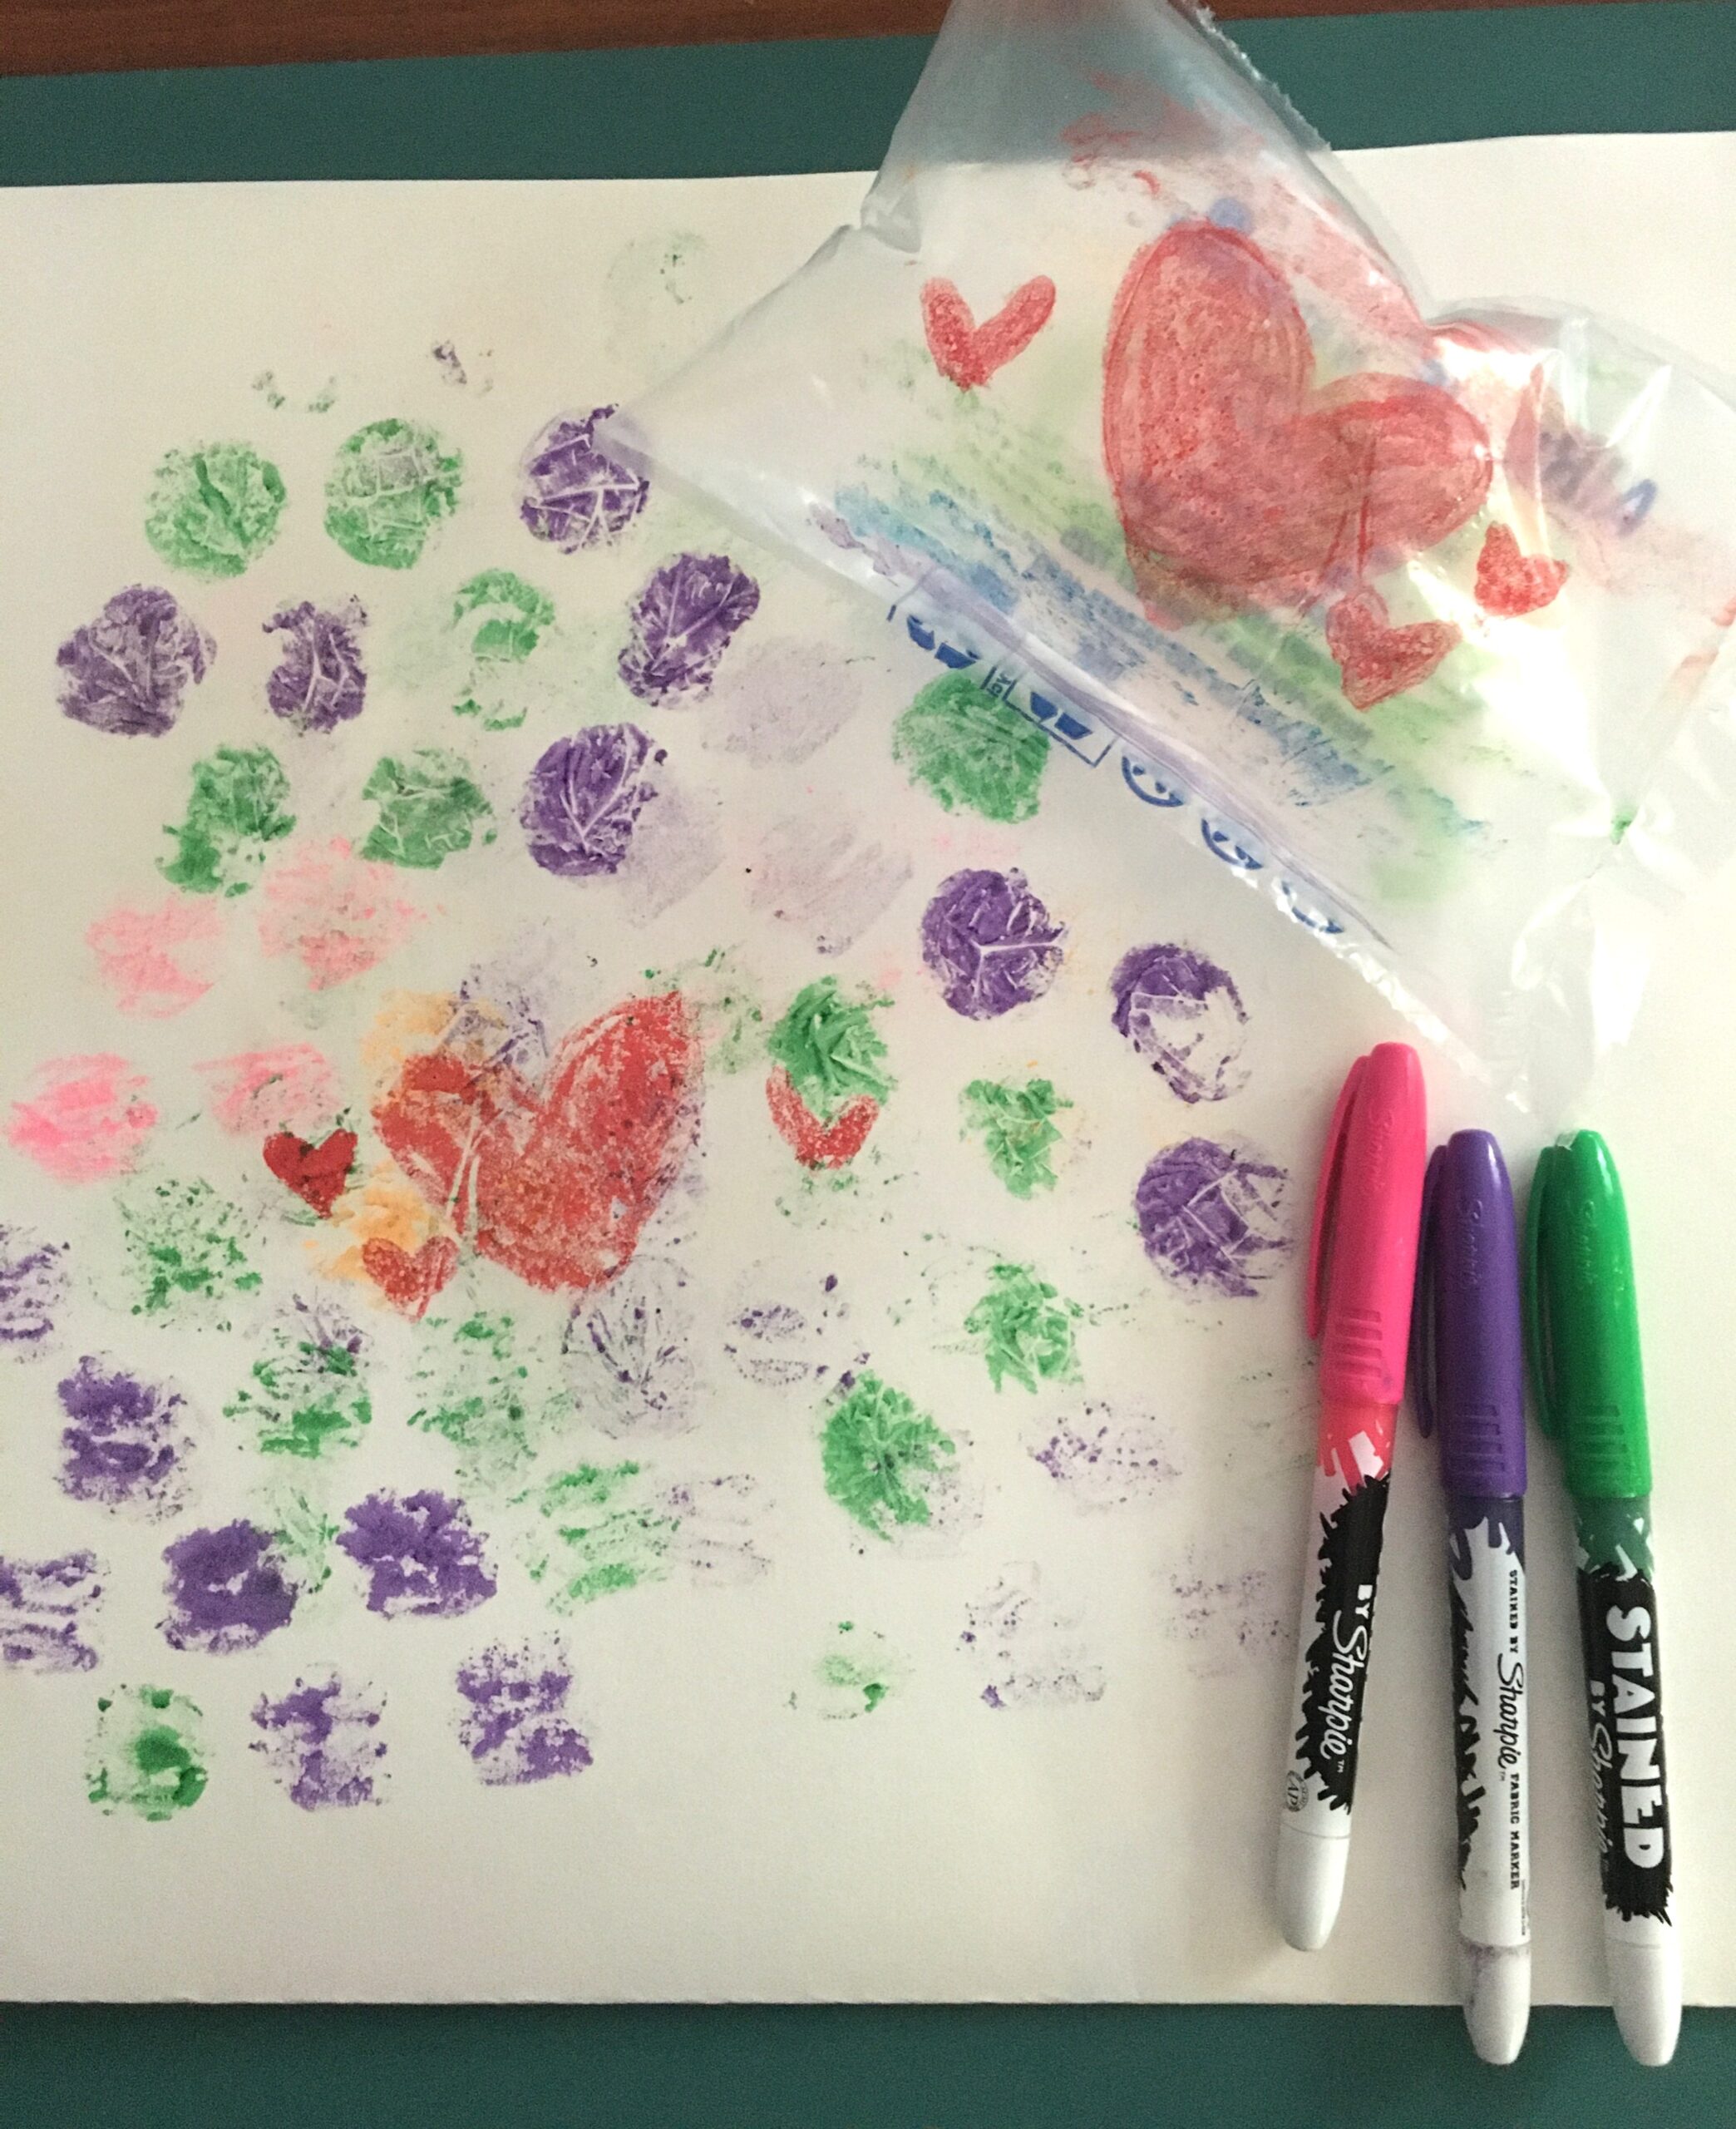 Markers and a plastic bag sitting next to a piece of paper decorated with dots and hearts transferred from the plastic bag.